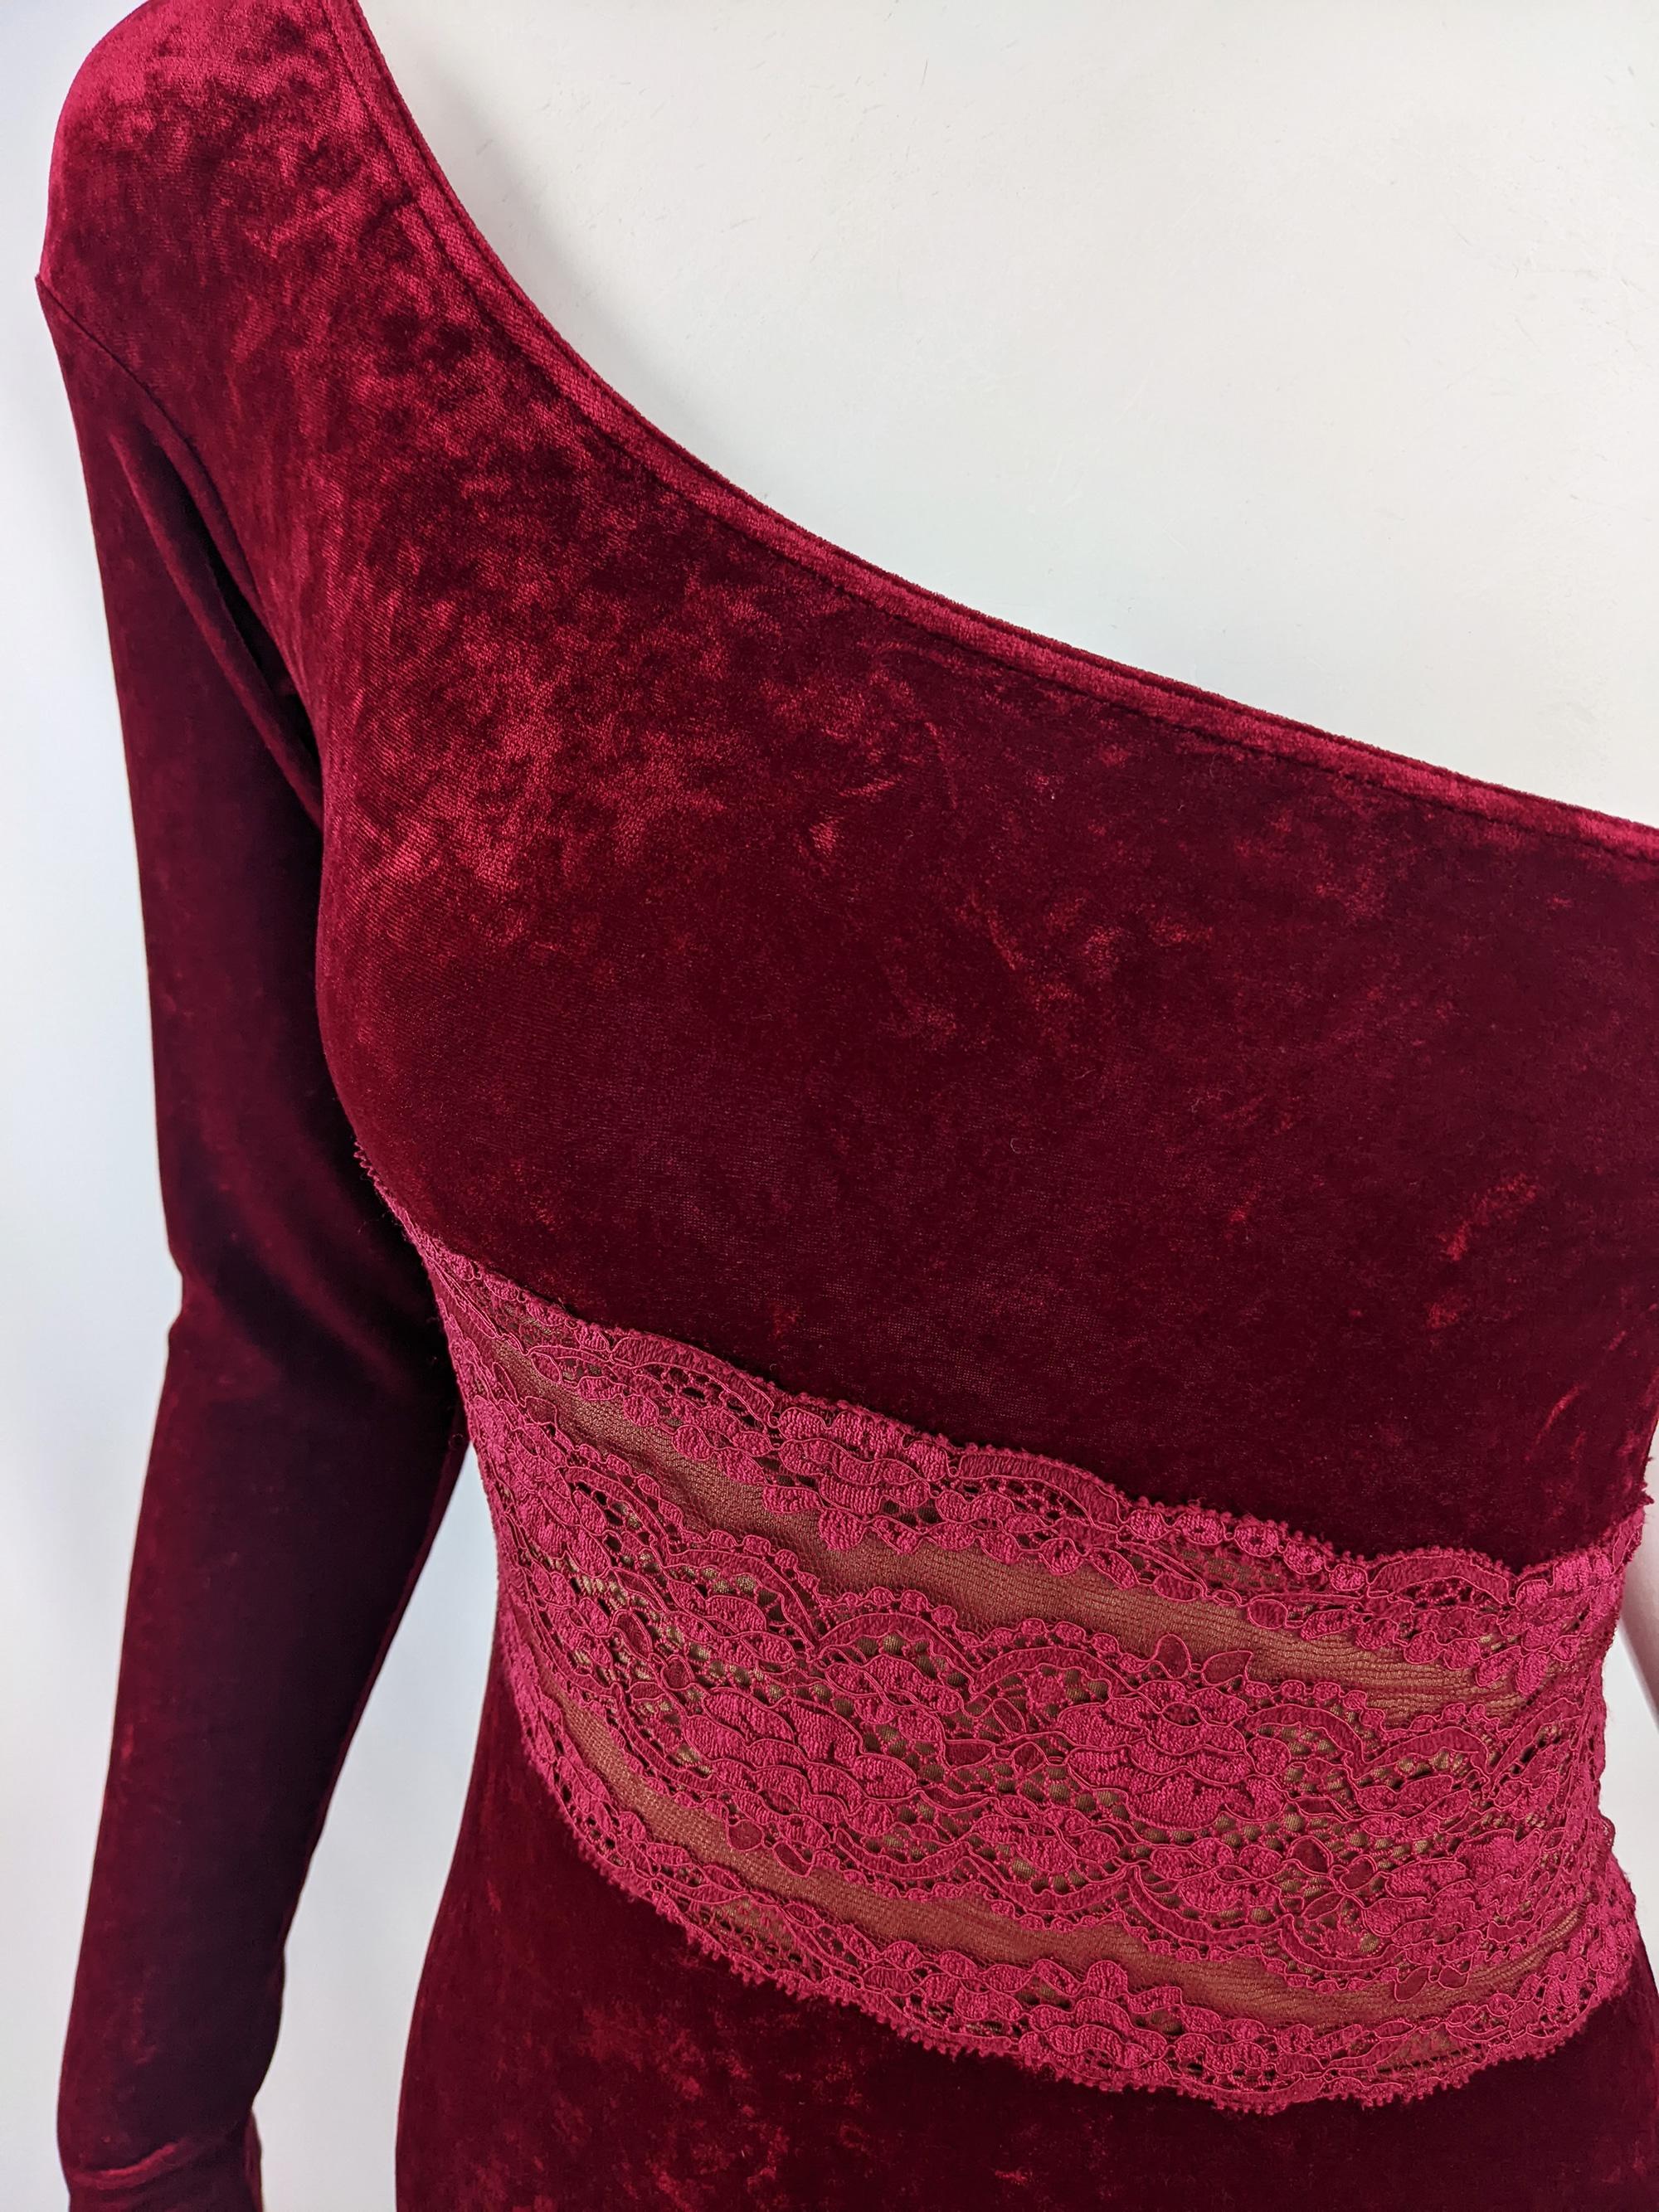 Ritmo Di Perla by La Perla Vintage Red Velour & Lace Bodycon Evening Dress In Excellent Condition For Sale In Doncaster, South Yorkshire